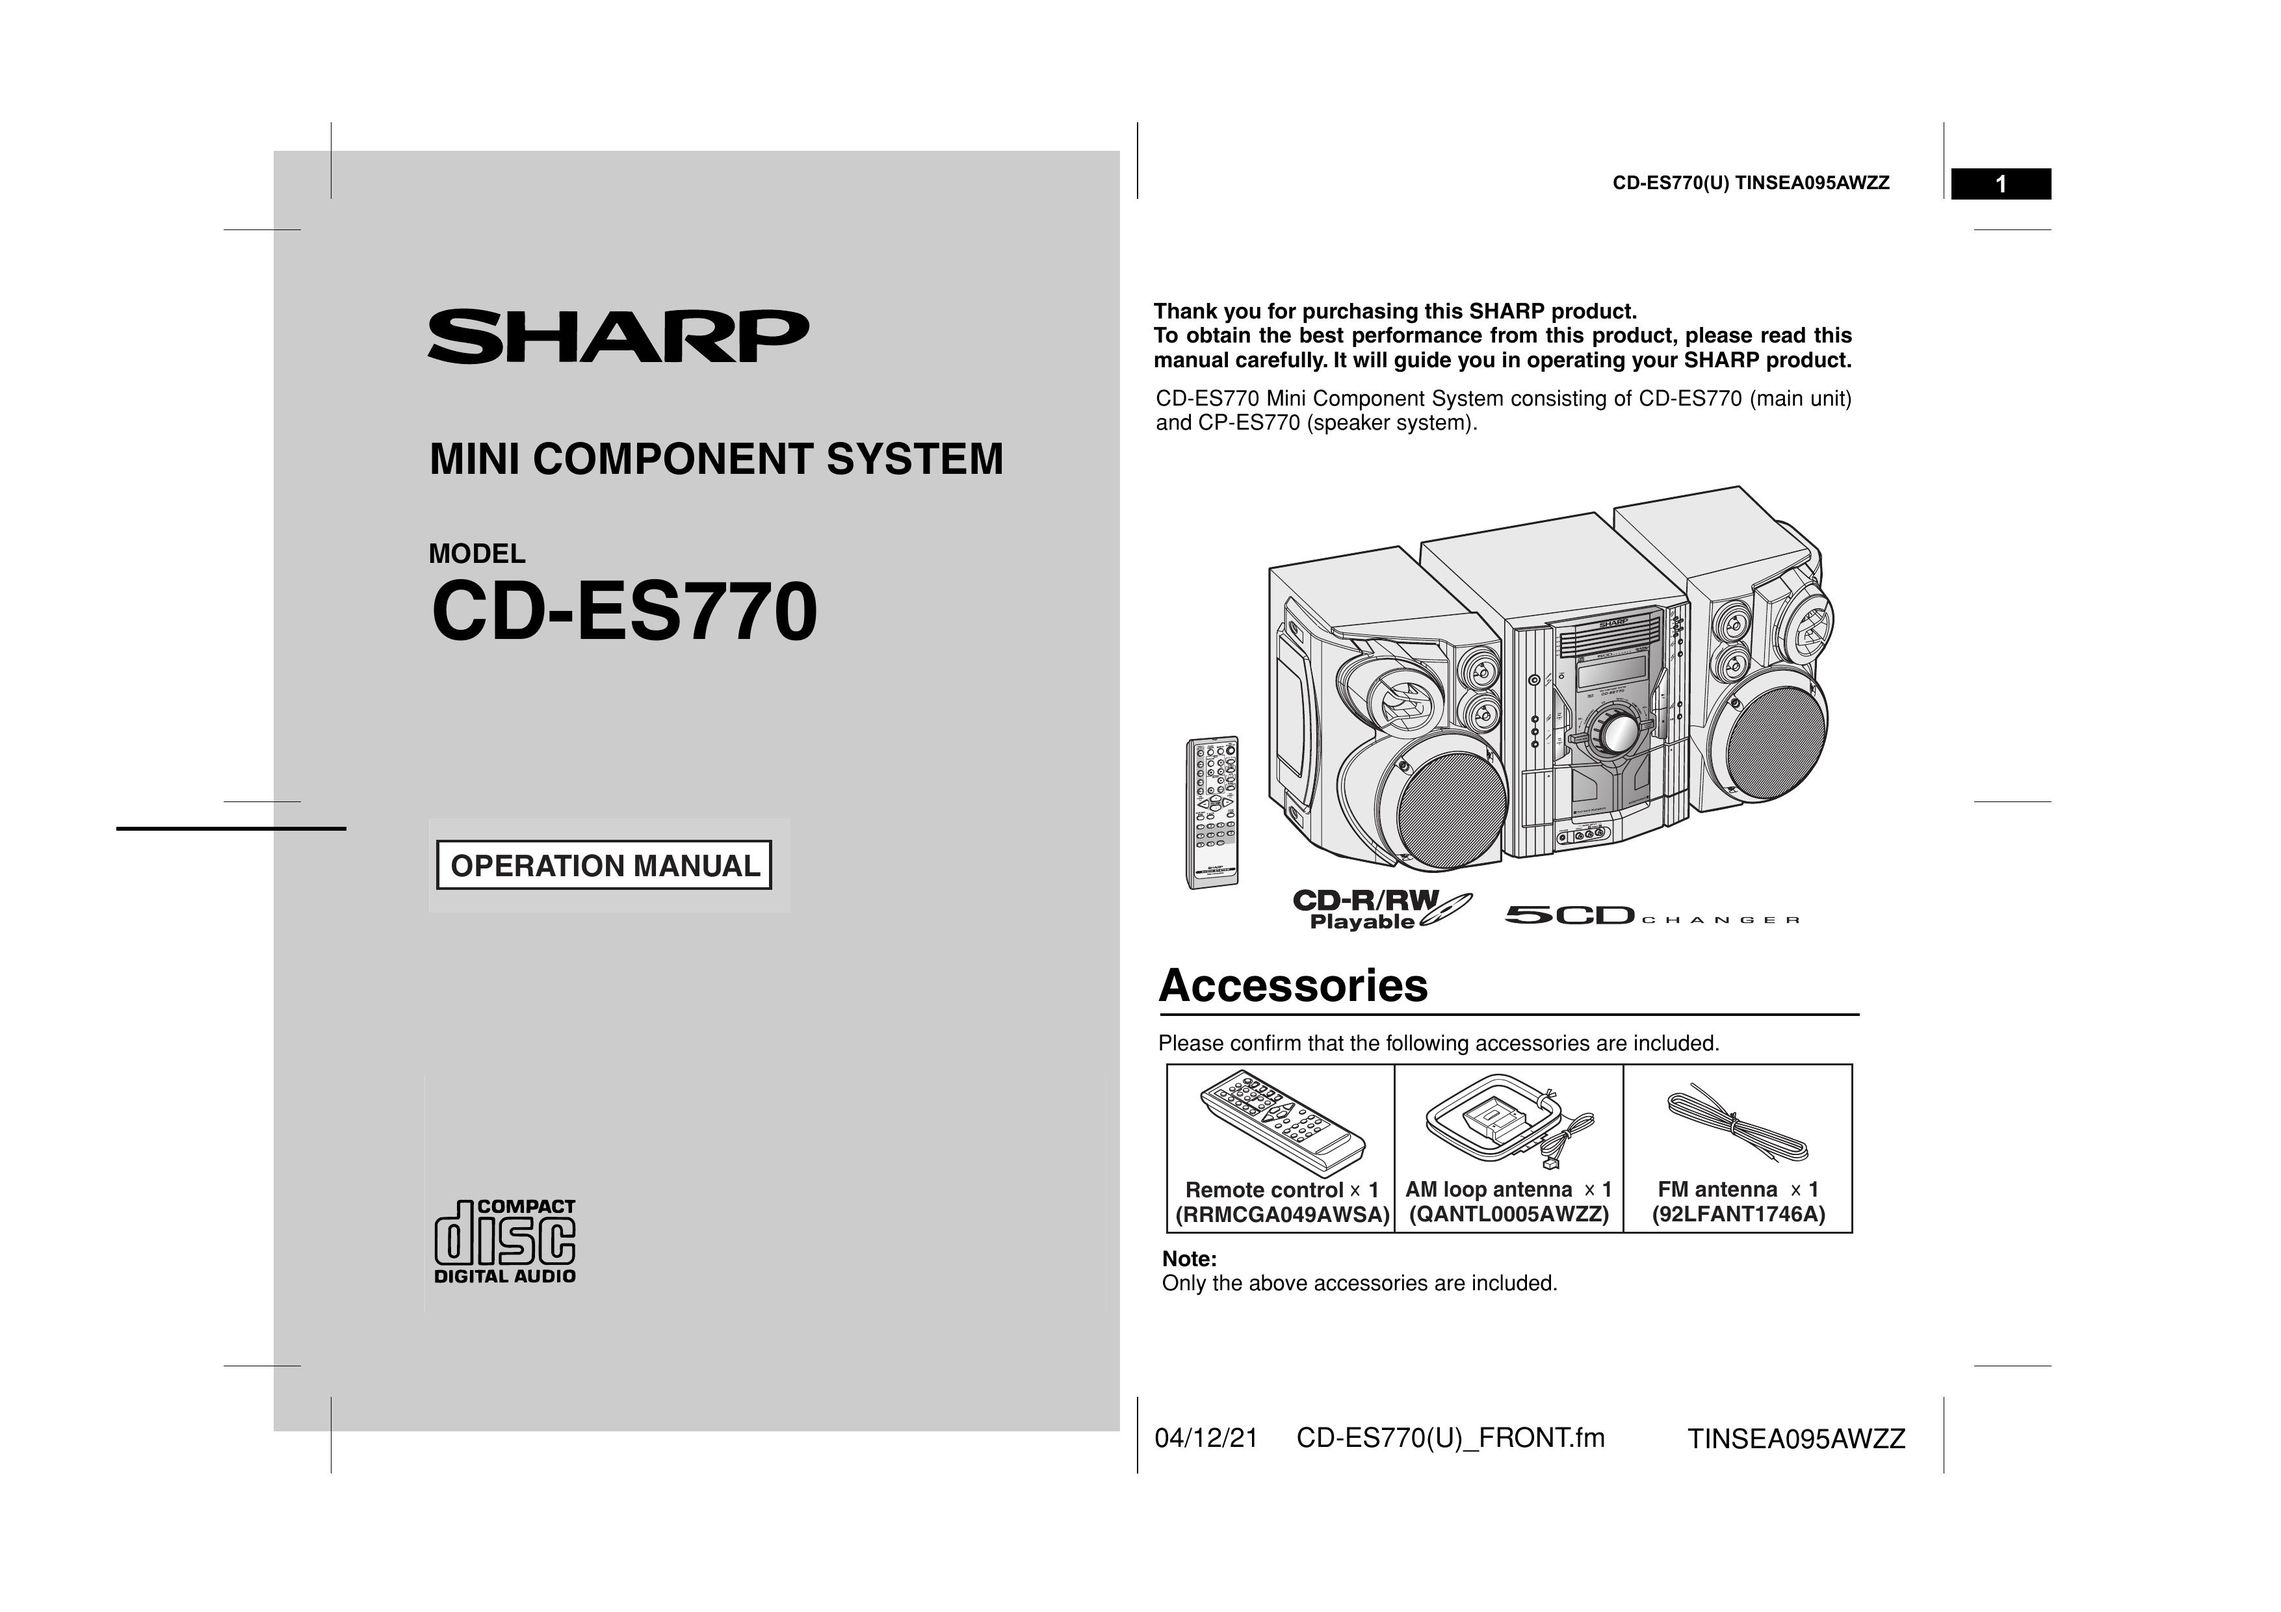 Sharp CP-ES770 Microwave Oven User Manual